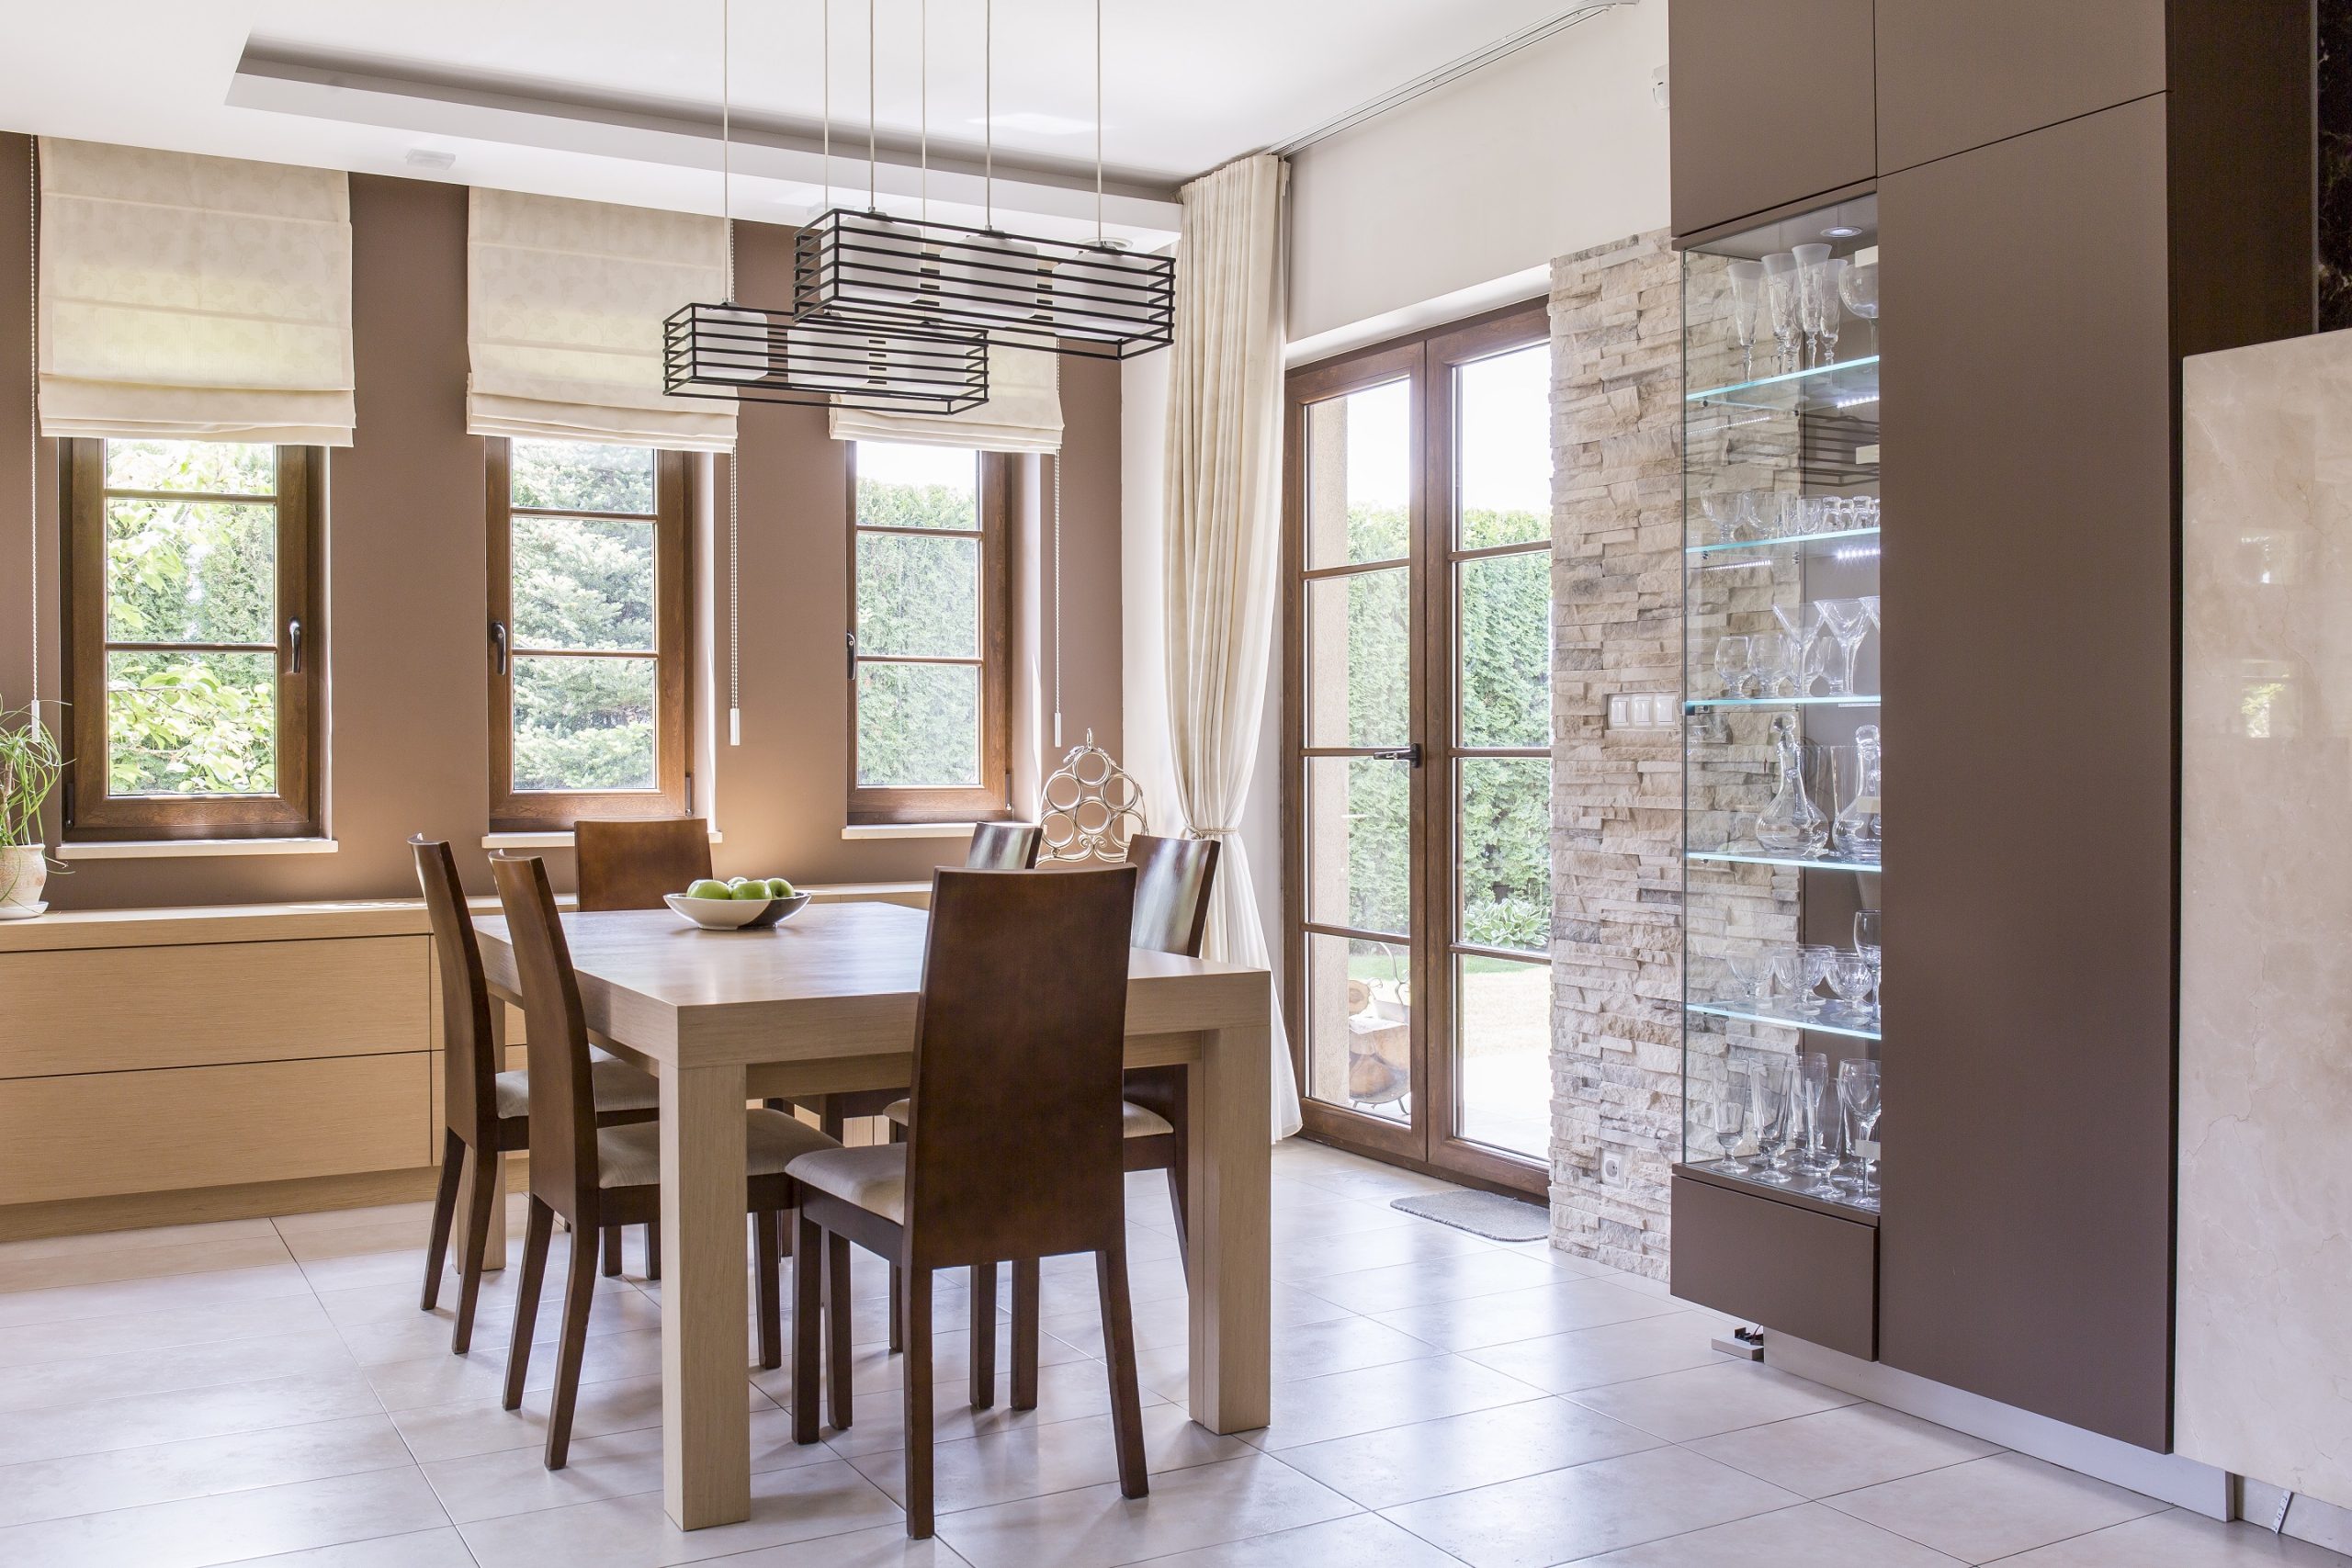 Comparing roller shades and solar shades – which one is better for your home?